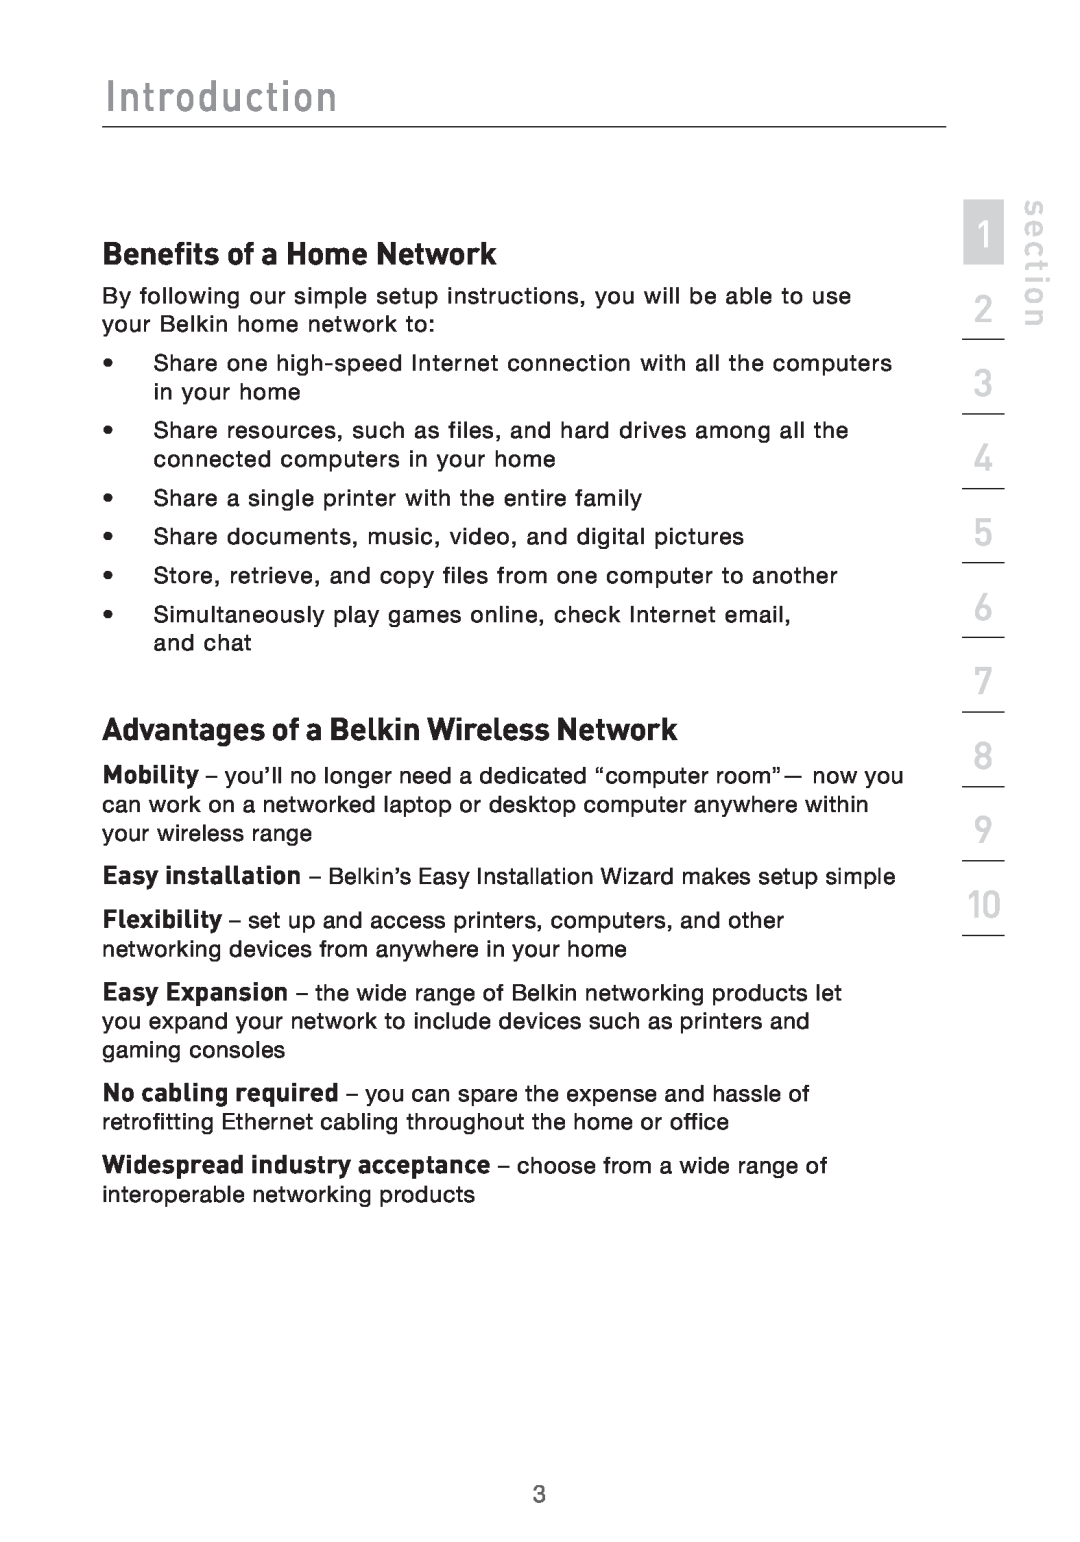 Belkin F5D7632UK4 user manual section, Benefits of a Home Network, Advantages of a Belkin Wireless Network, Introduction 